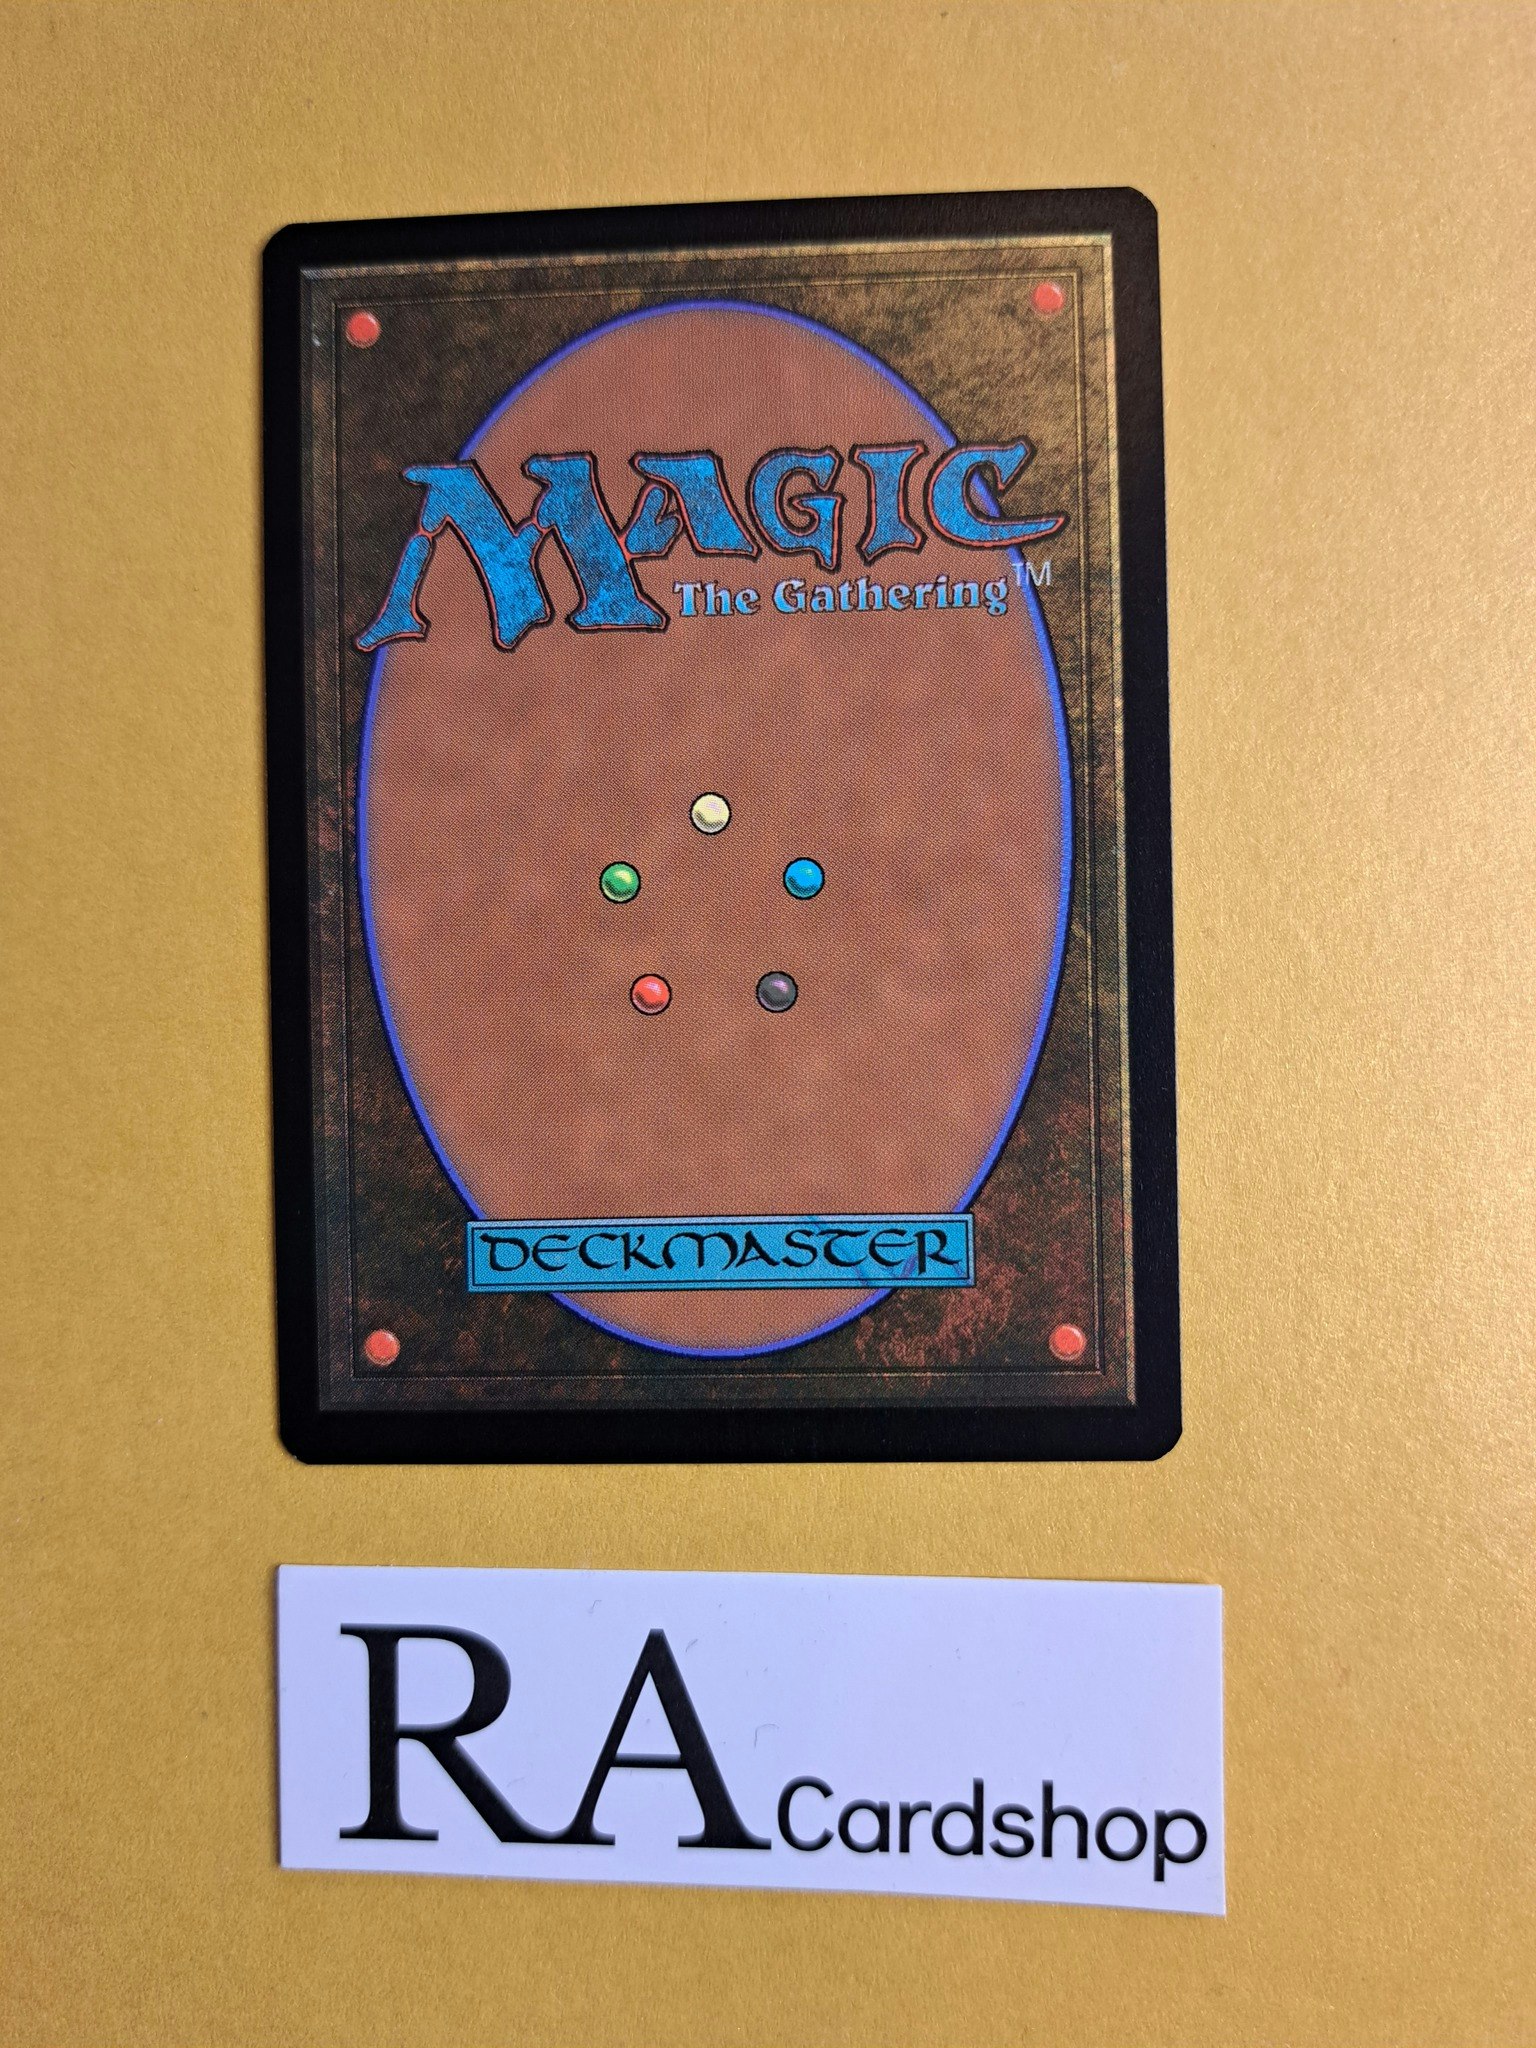 Snarespinner Common 179/281 Dominaria United (DMU) Magic the Gathering